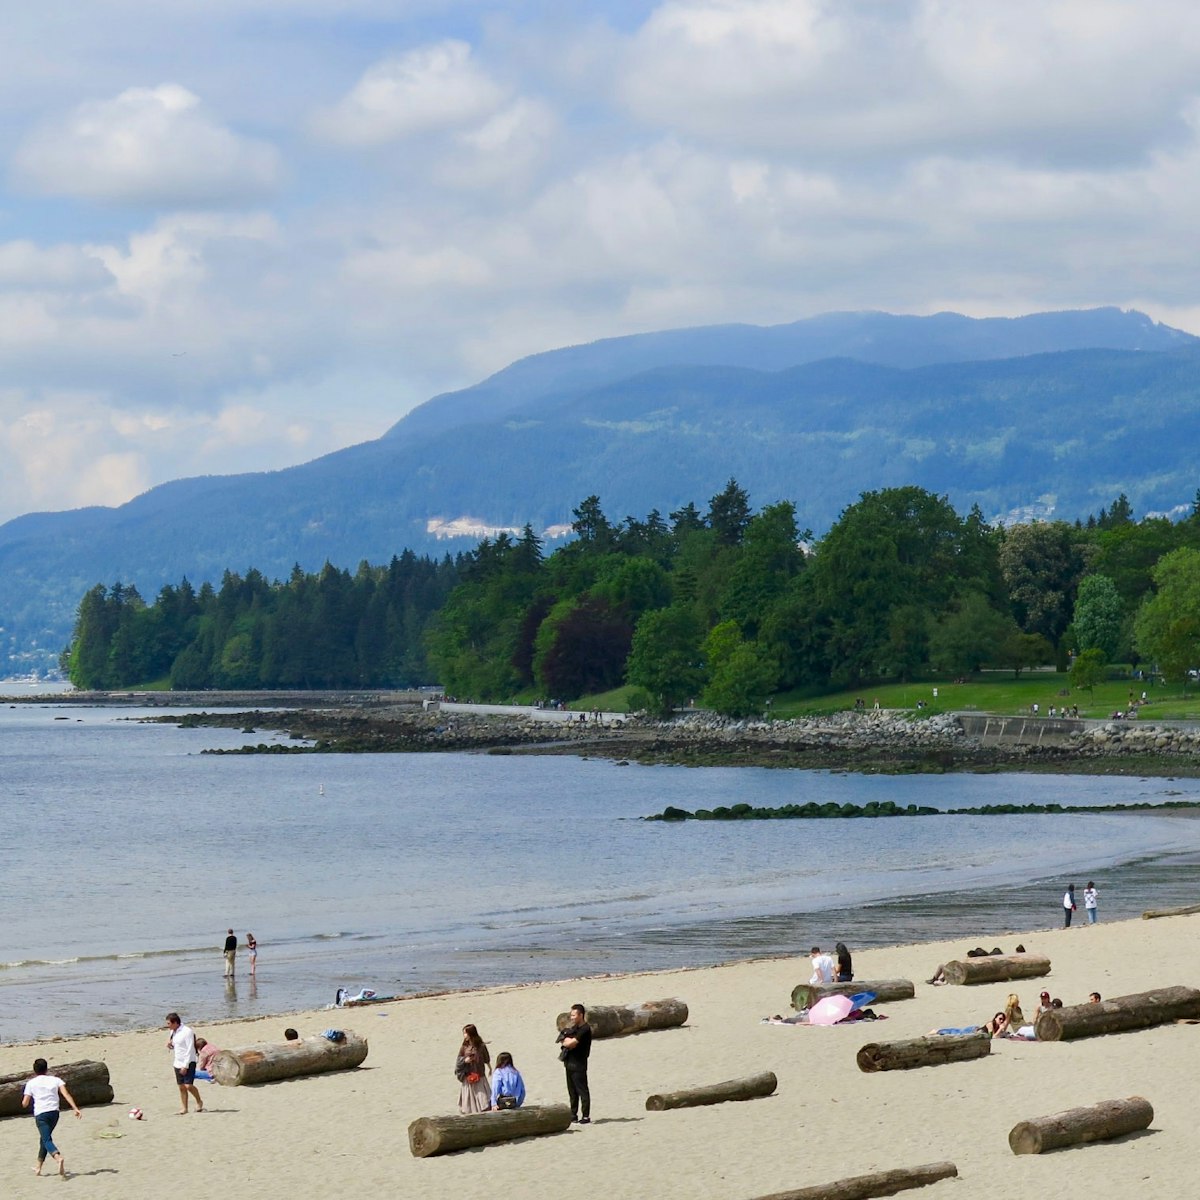 English Bay Beach in Vancouver's West End neighbourhood